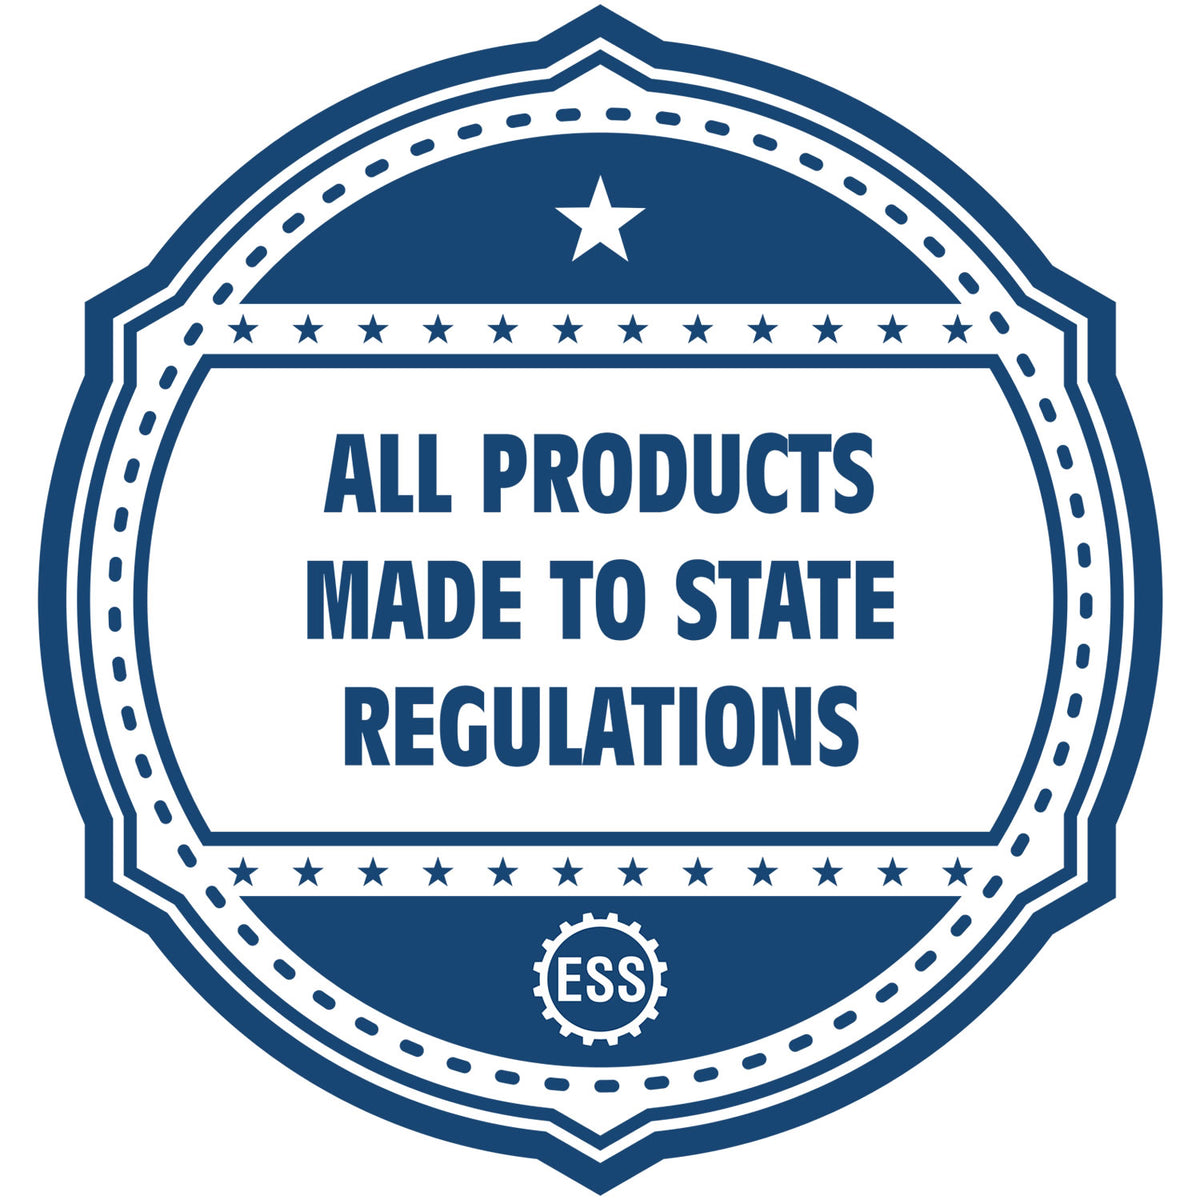 A blue icon or badge for the Gift North Carolina Landscape Architect Seal showing that this product is made in compliance with state regulations.